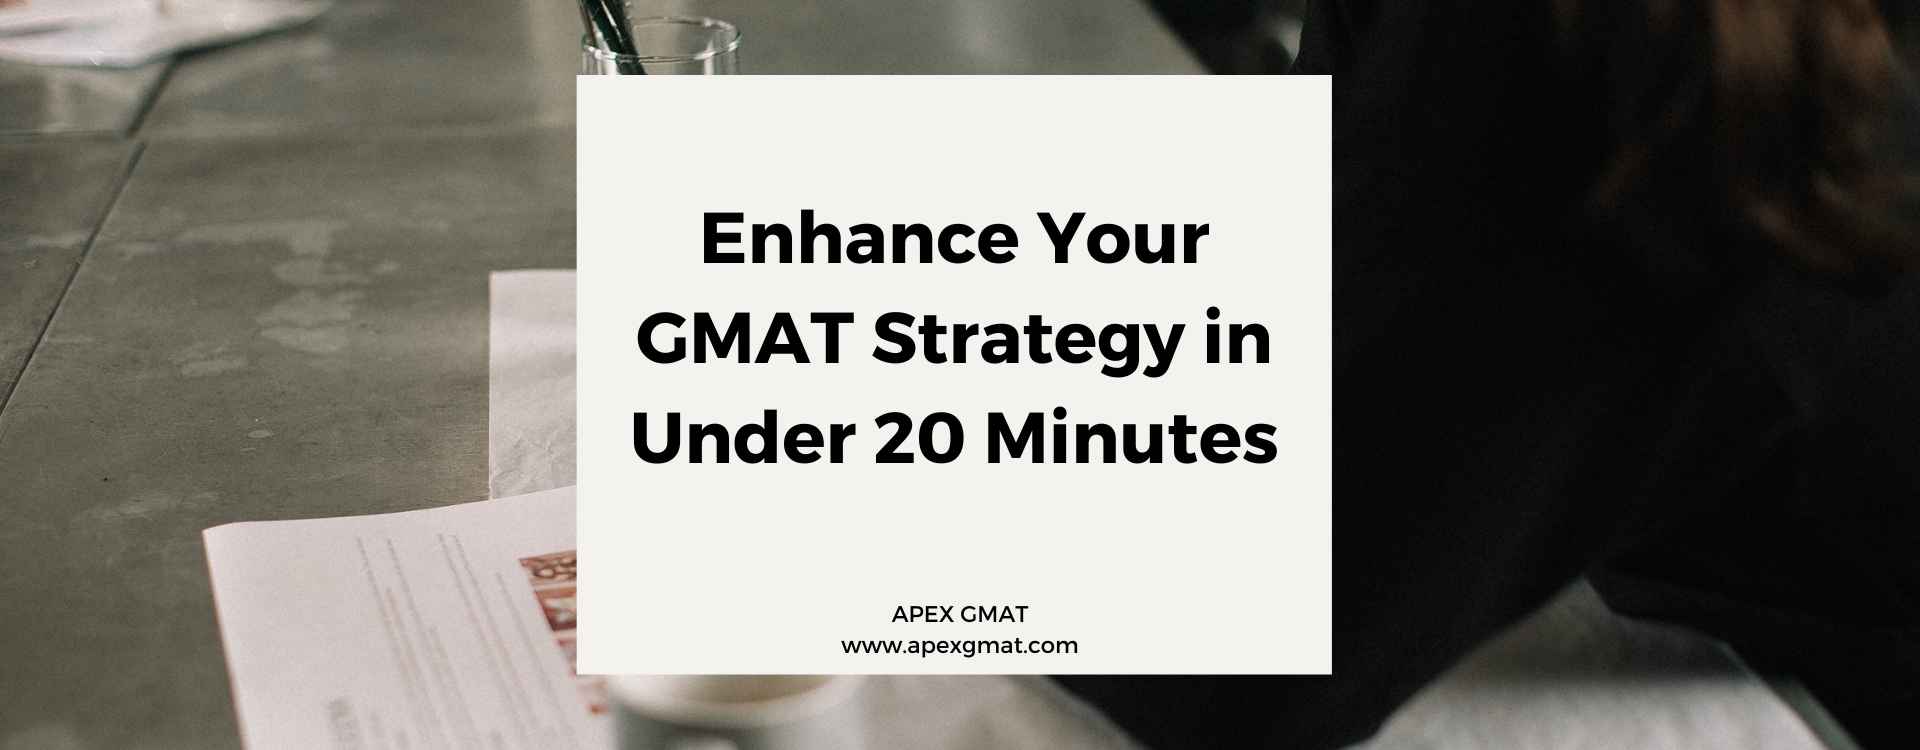 Enhance Your GMAT Strategy in Under 20 Minutes